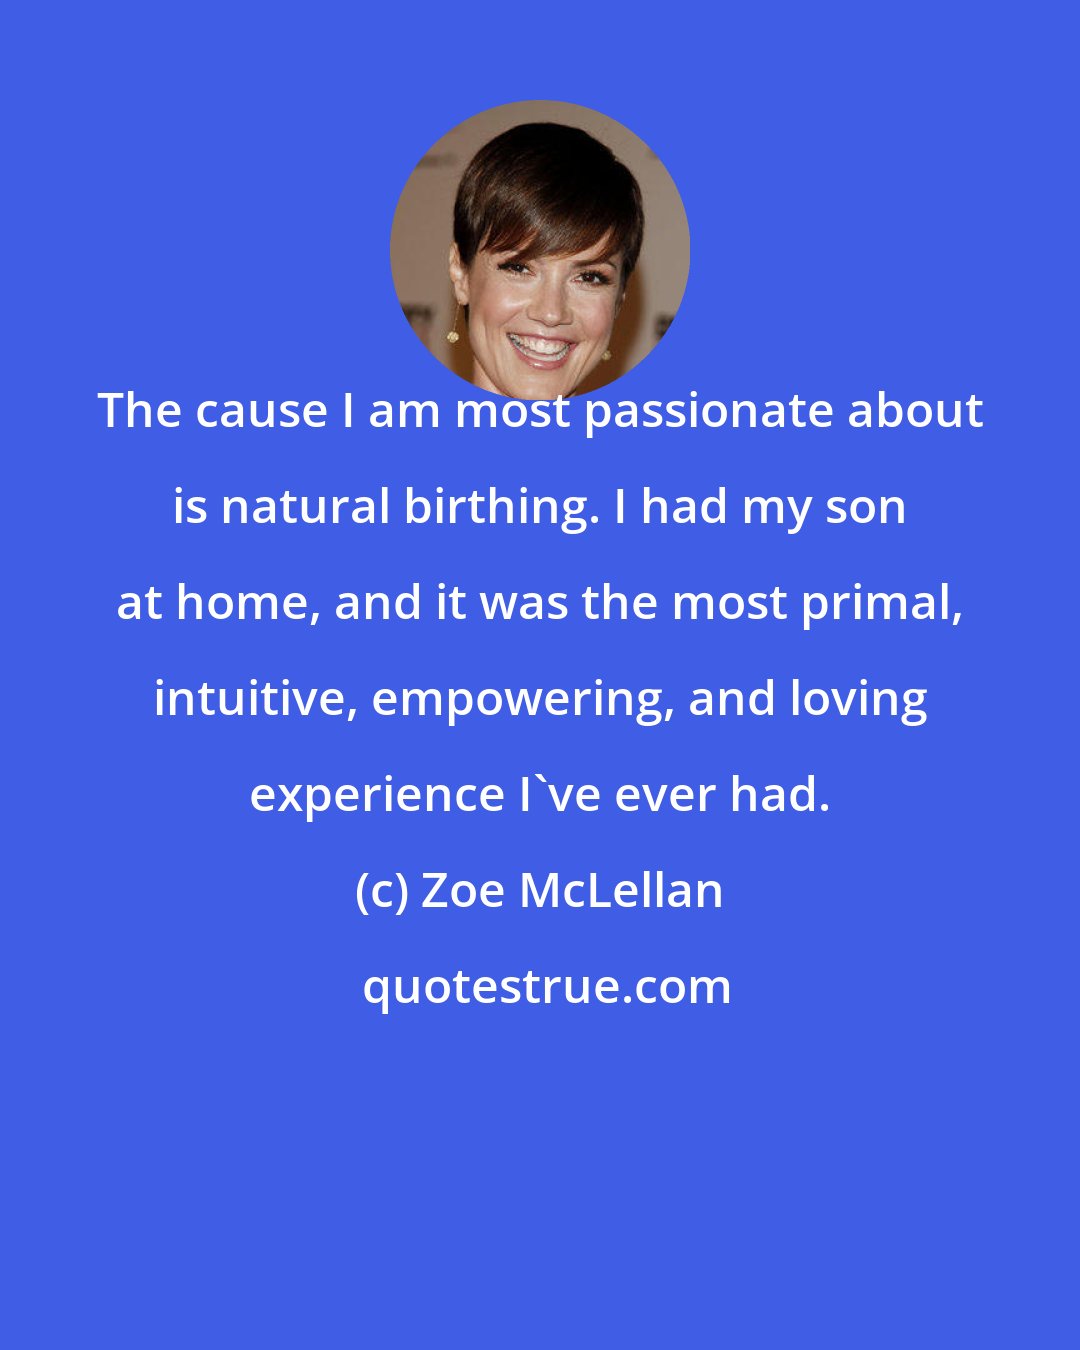 Zoe McLellan: The cause I am most passionate about is natural birthing. I had my son at home, and it was the most primal, intuitive, empowering, and loving experience I've ever had.